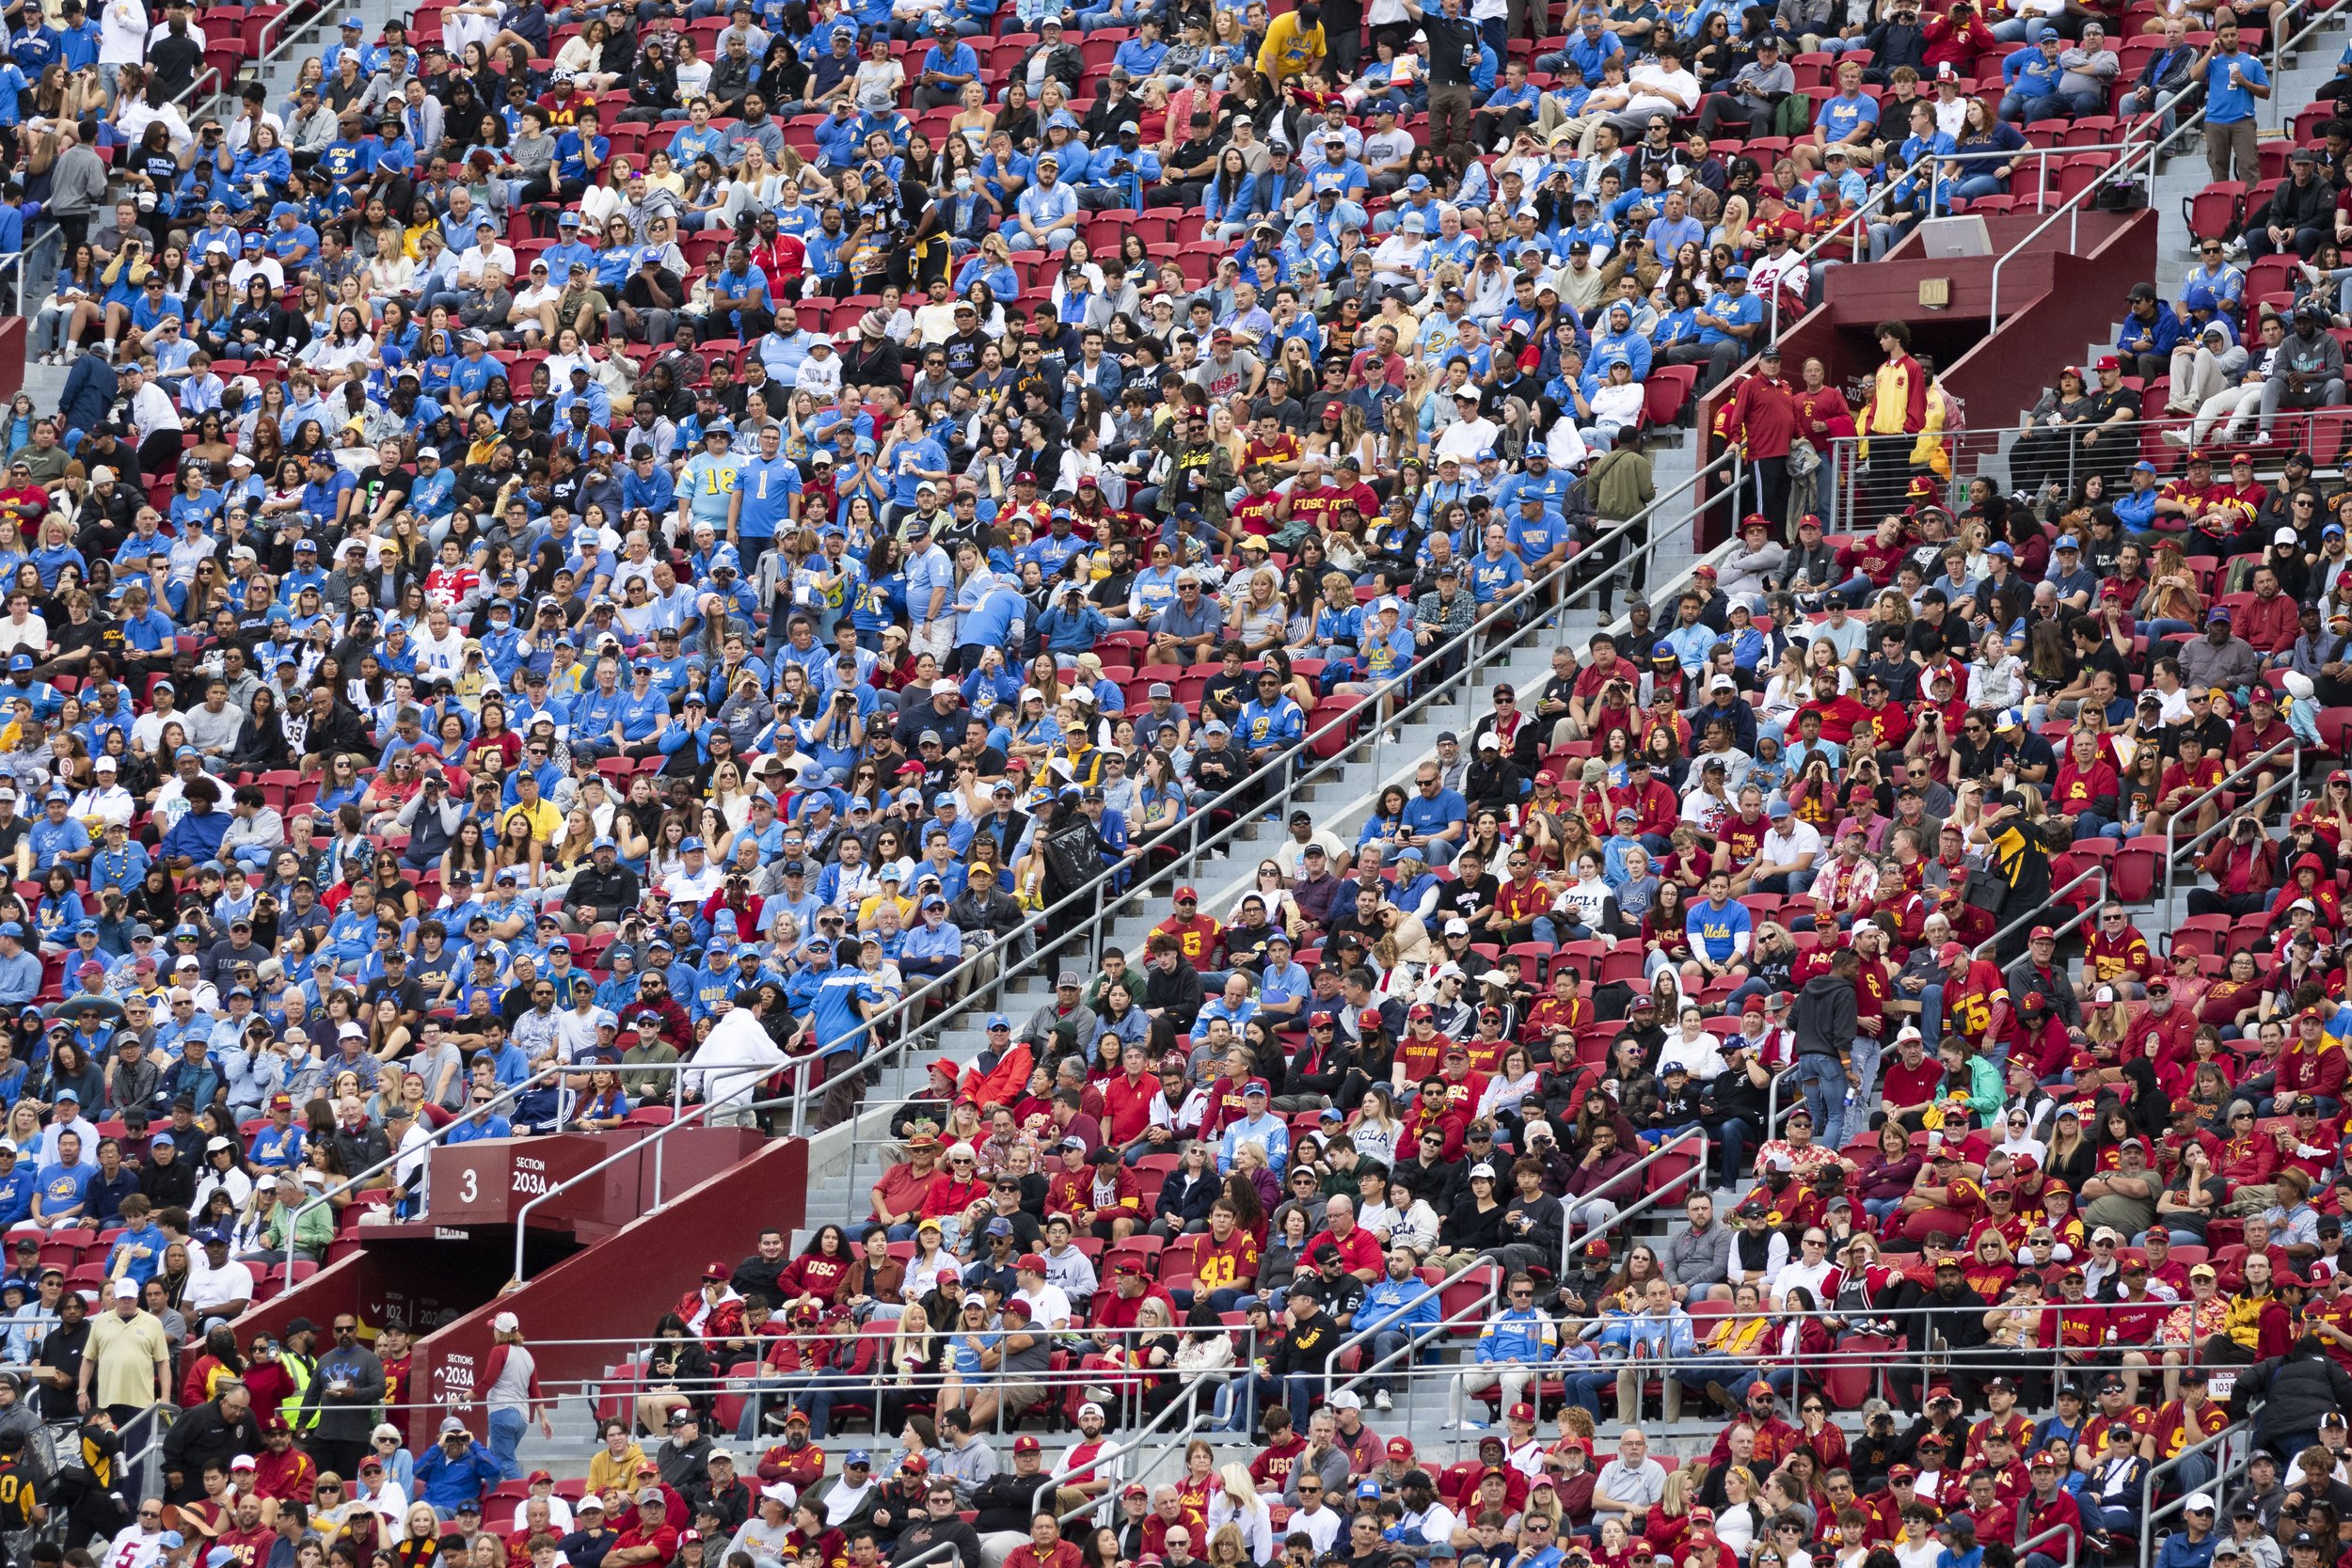  The crowd watching a football game between University of California, Los Angeles (UCLA) Bruins and University of Southern California (USC) Trojans at the Los Angeles Memorial Coliseum, in Los Angeles, Calif., on Saturday, Nov. 18, 2023. The Bruins w